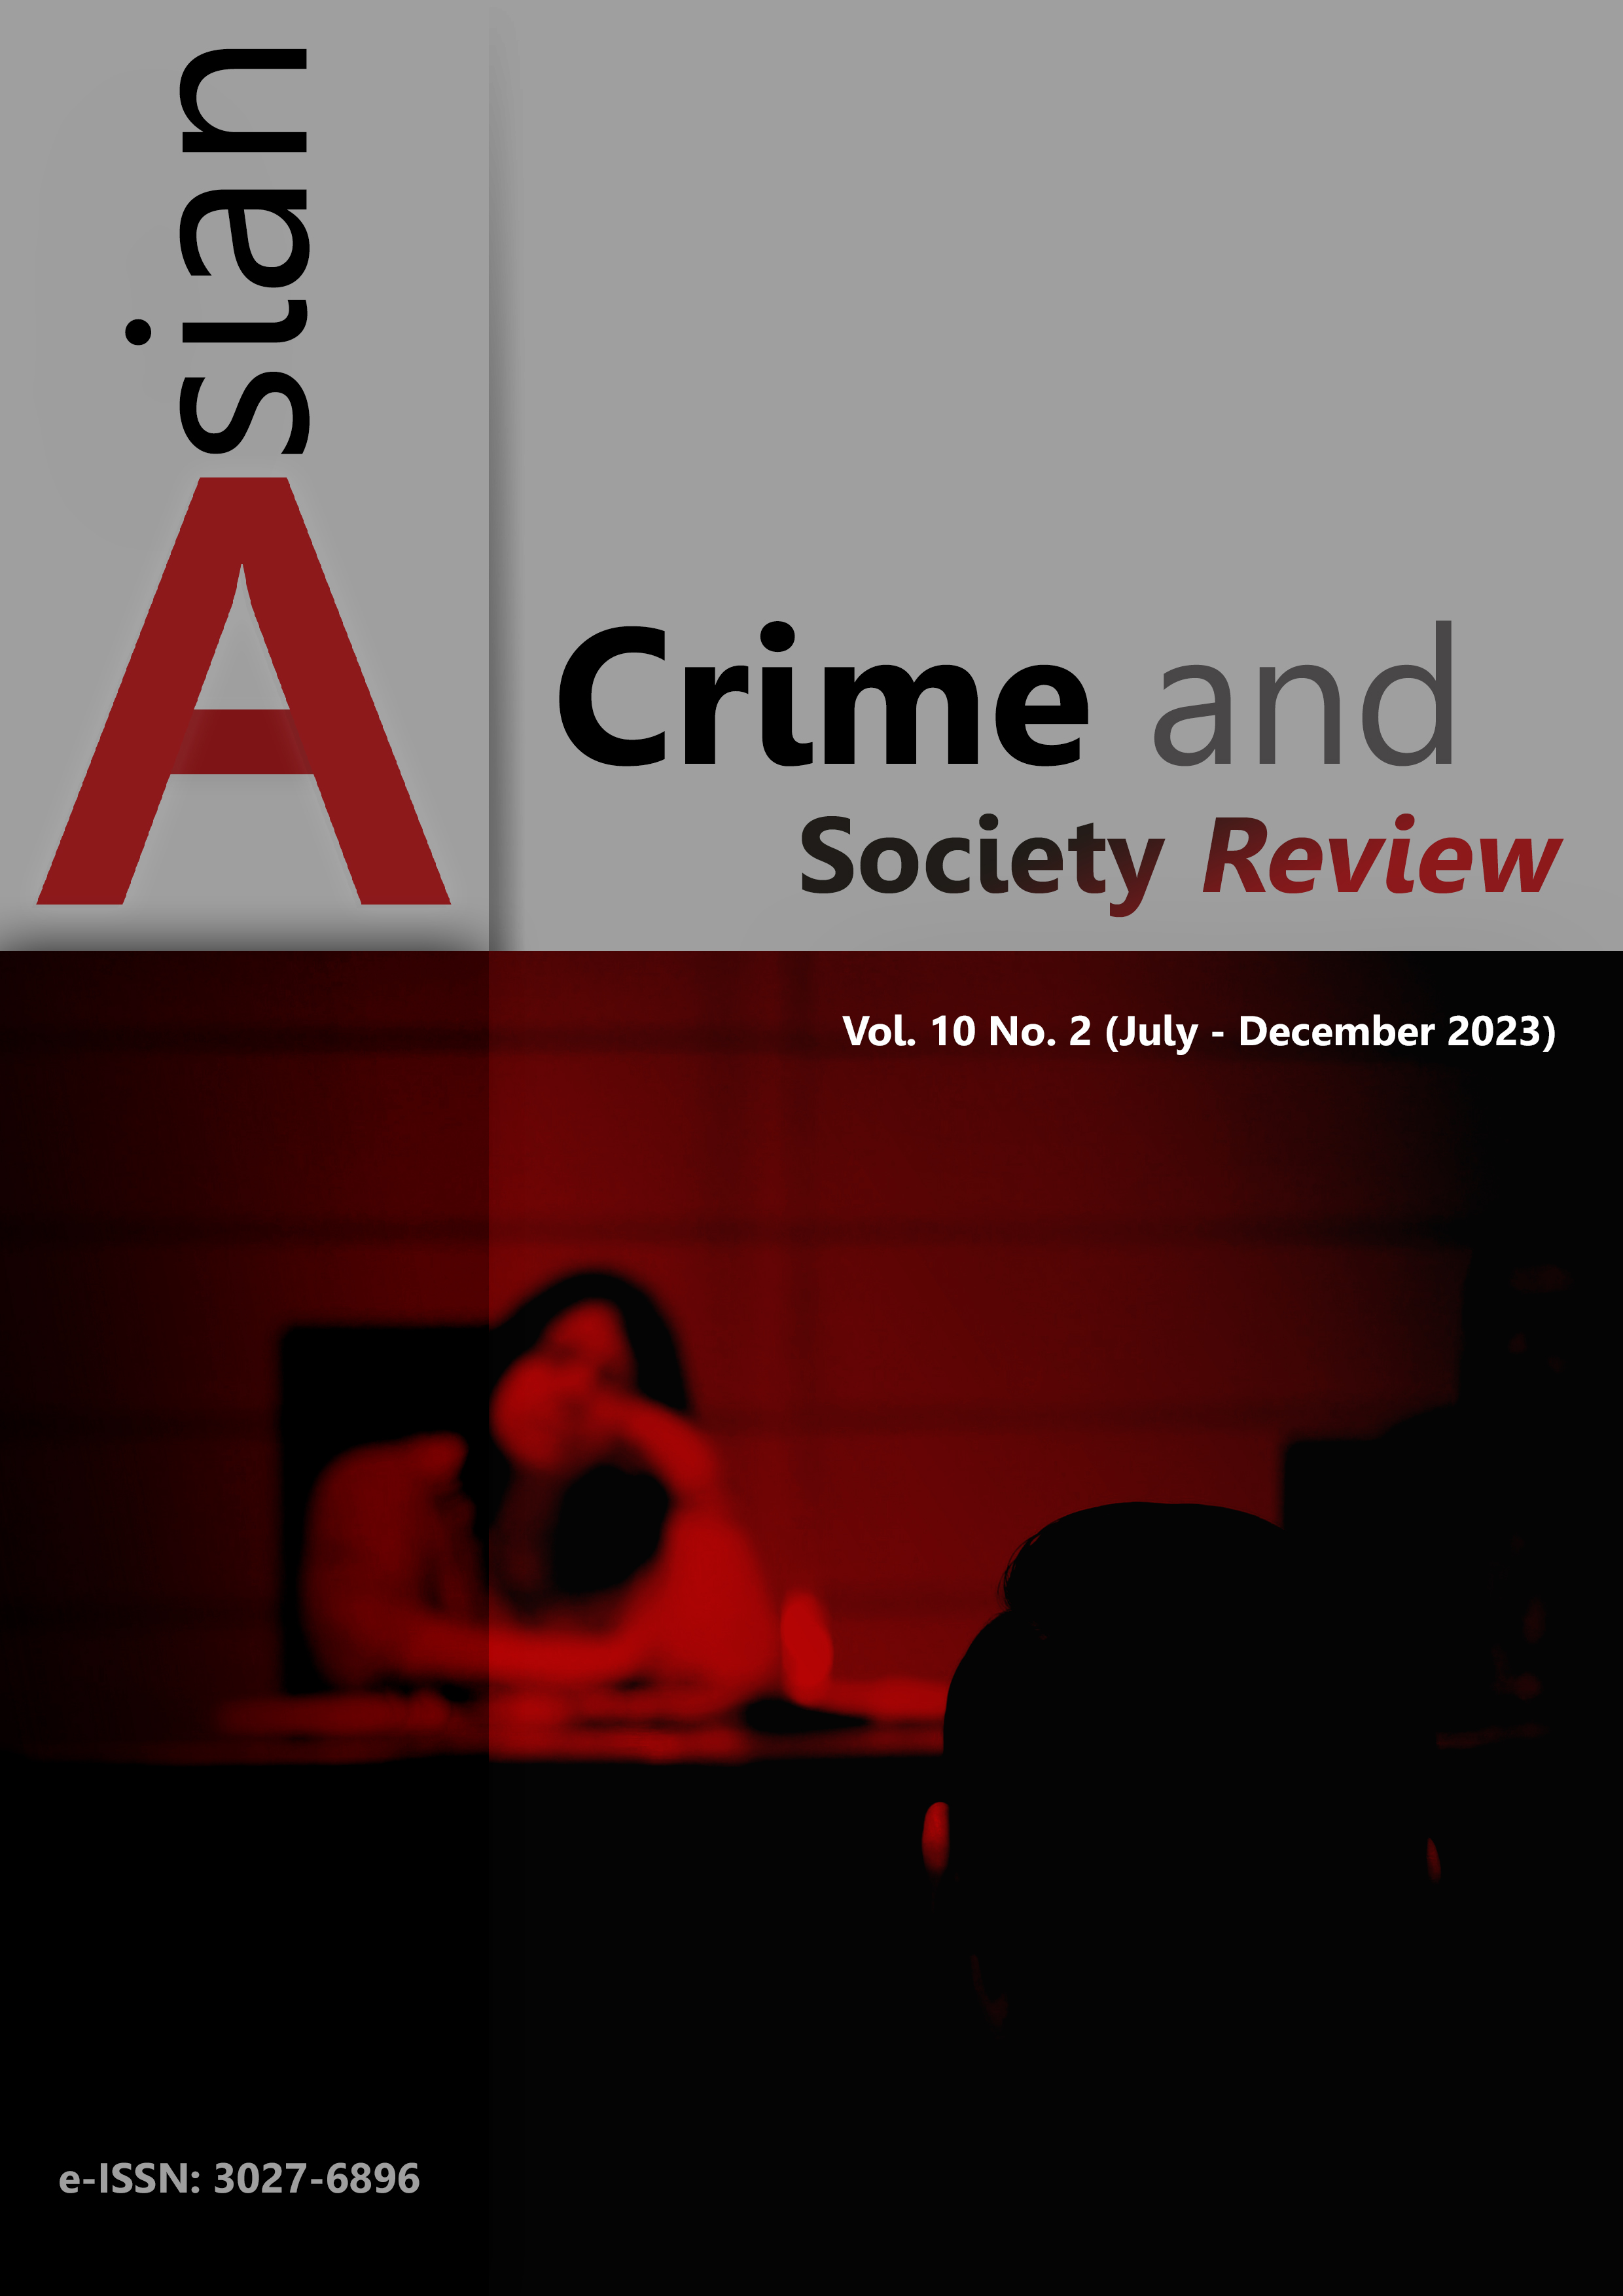 					View Vol. 10 No. 2 (2023): Asian Crime and Society Review
				